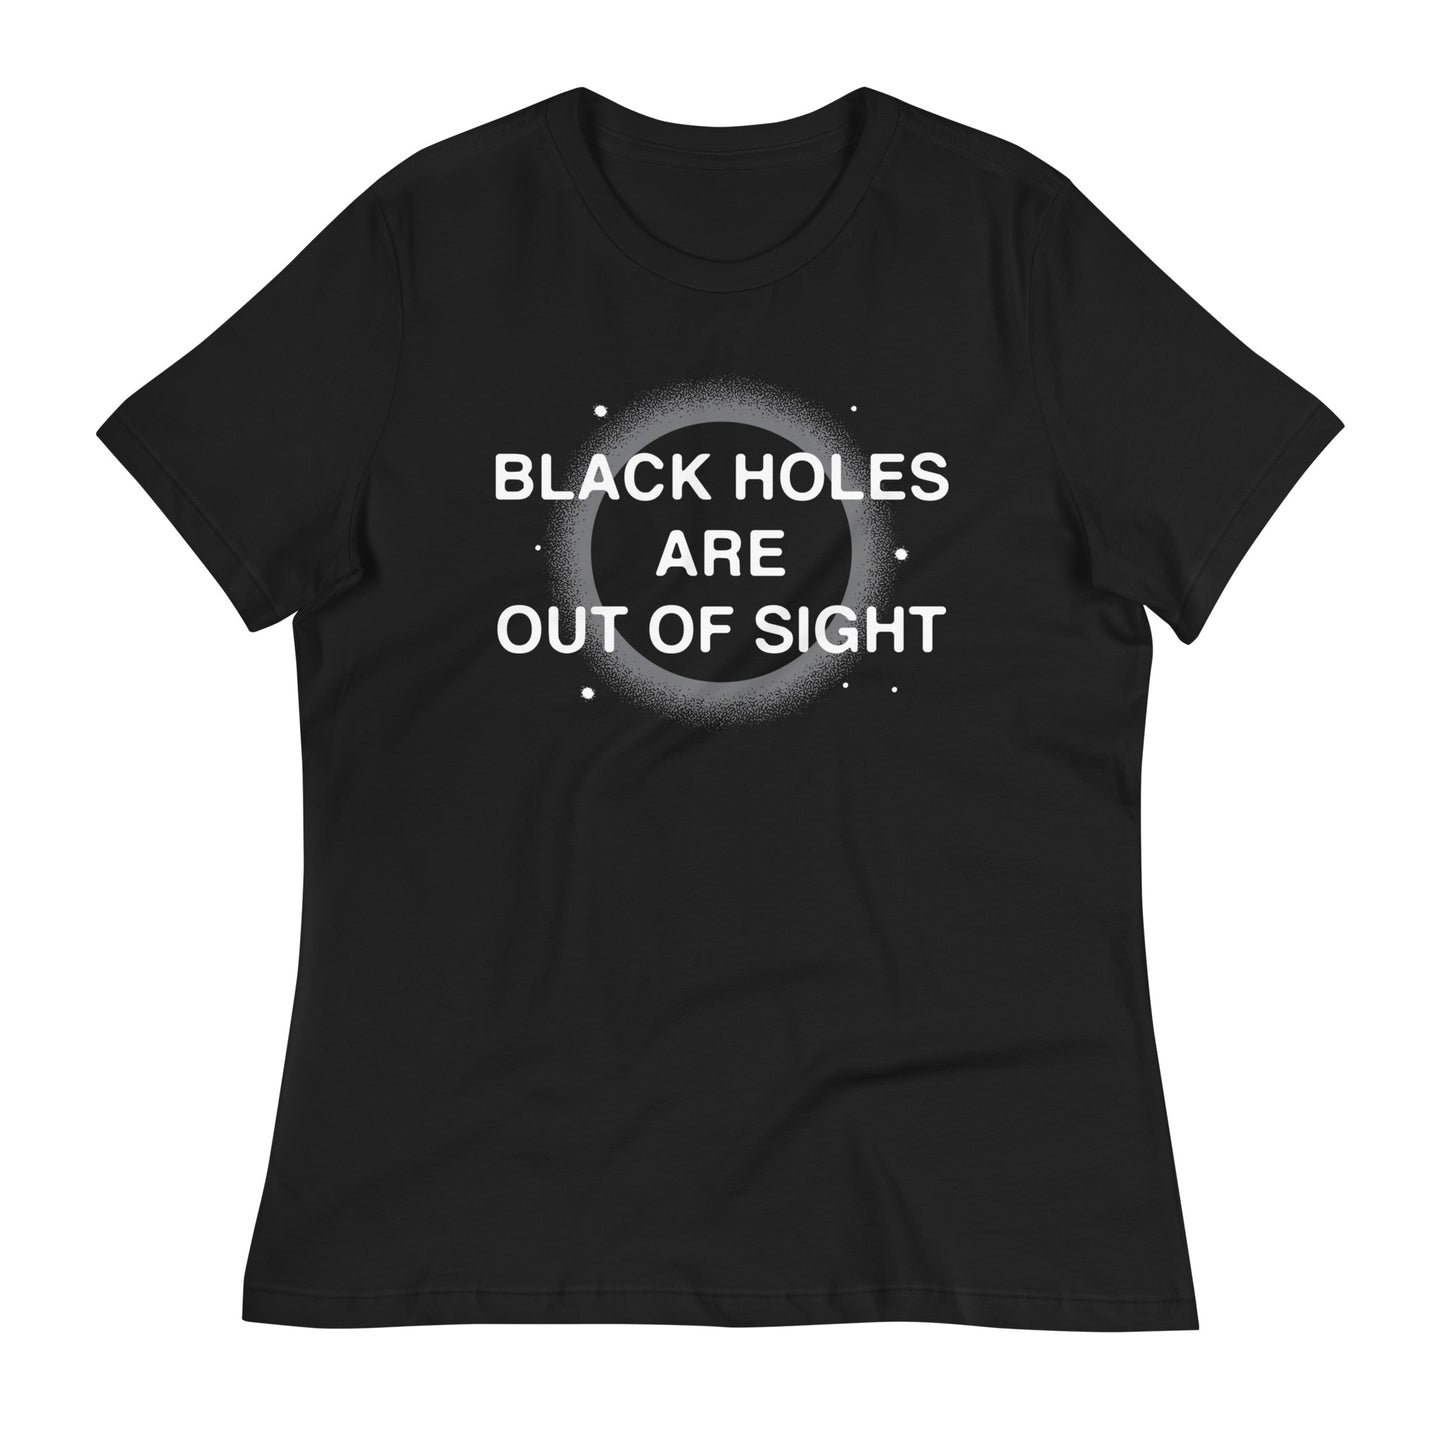 Black Holes Are Out Of Sight Women's Signature Tee